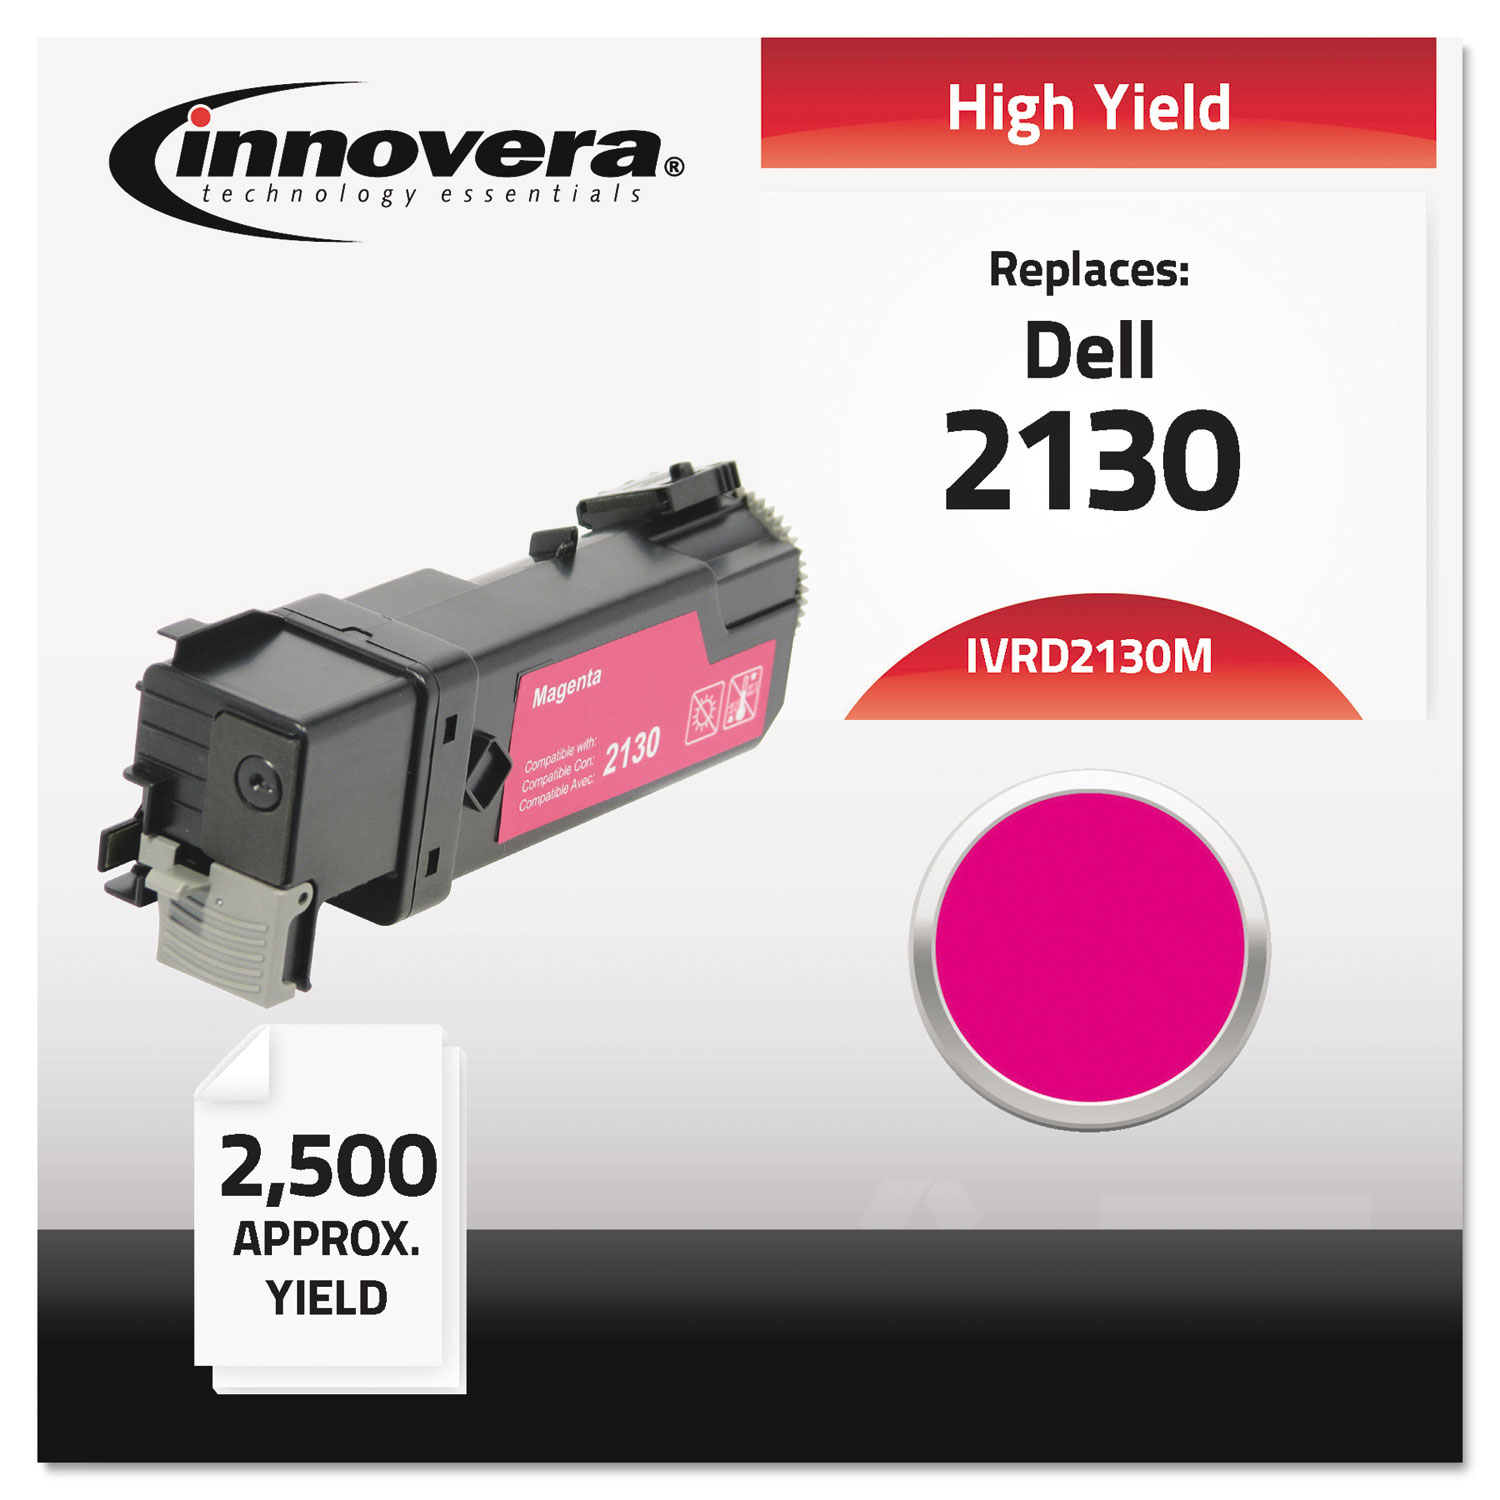 Remanufactured 330-1433 (2130) High-Yield Toner, 2500 Page-Yield, Magenta